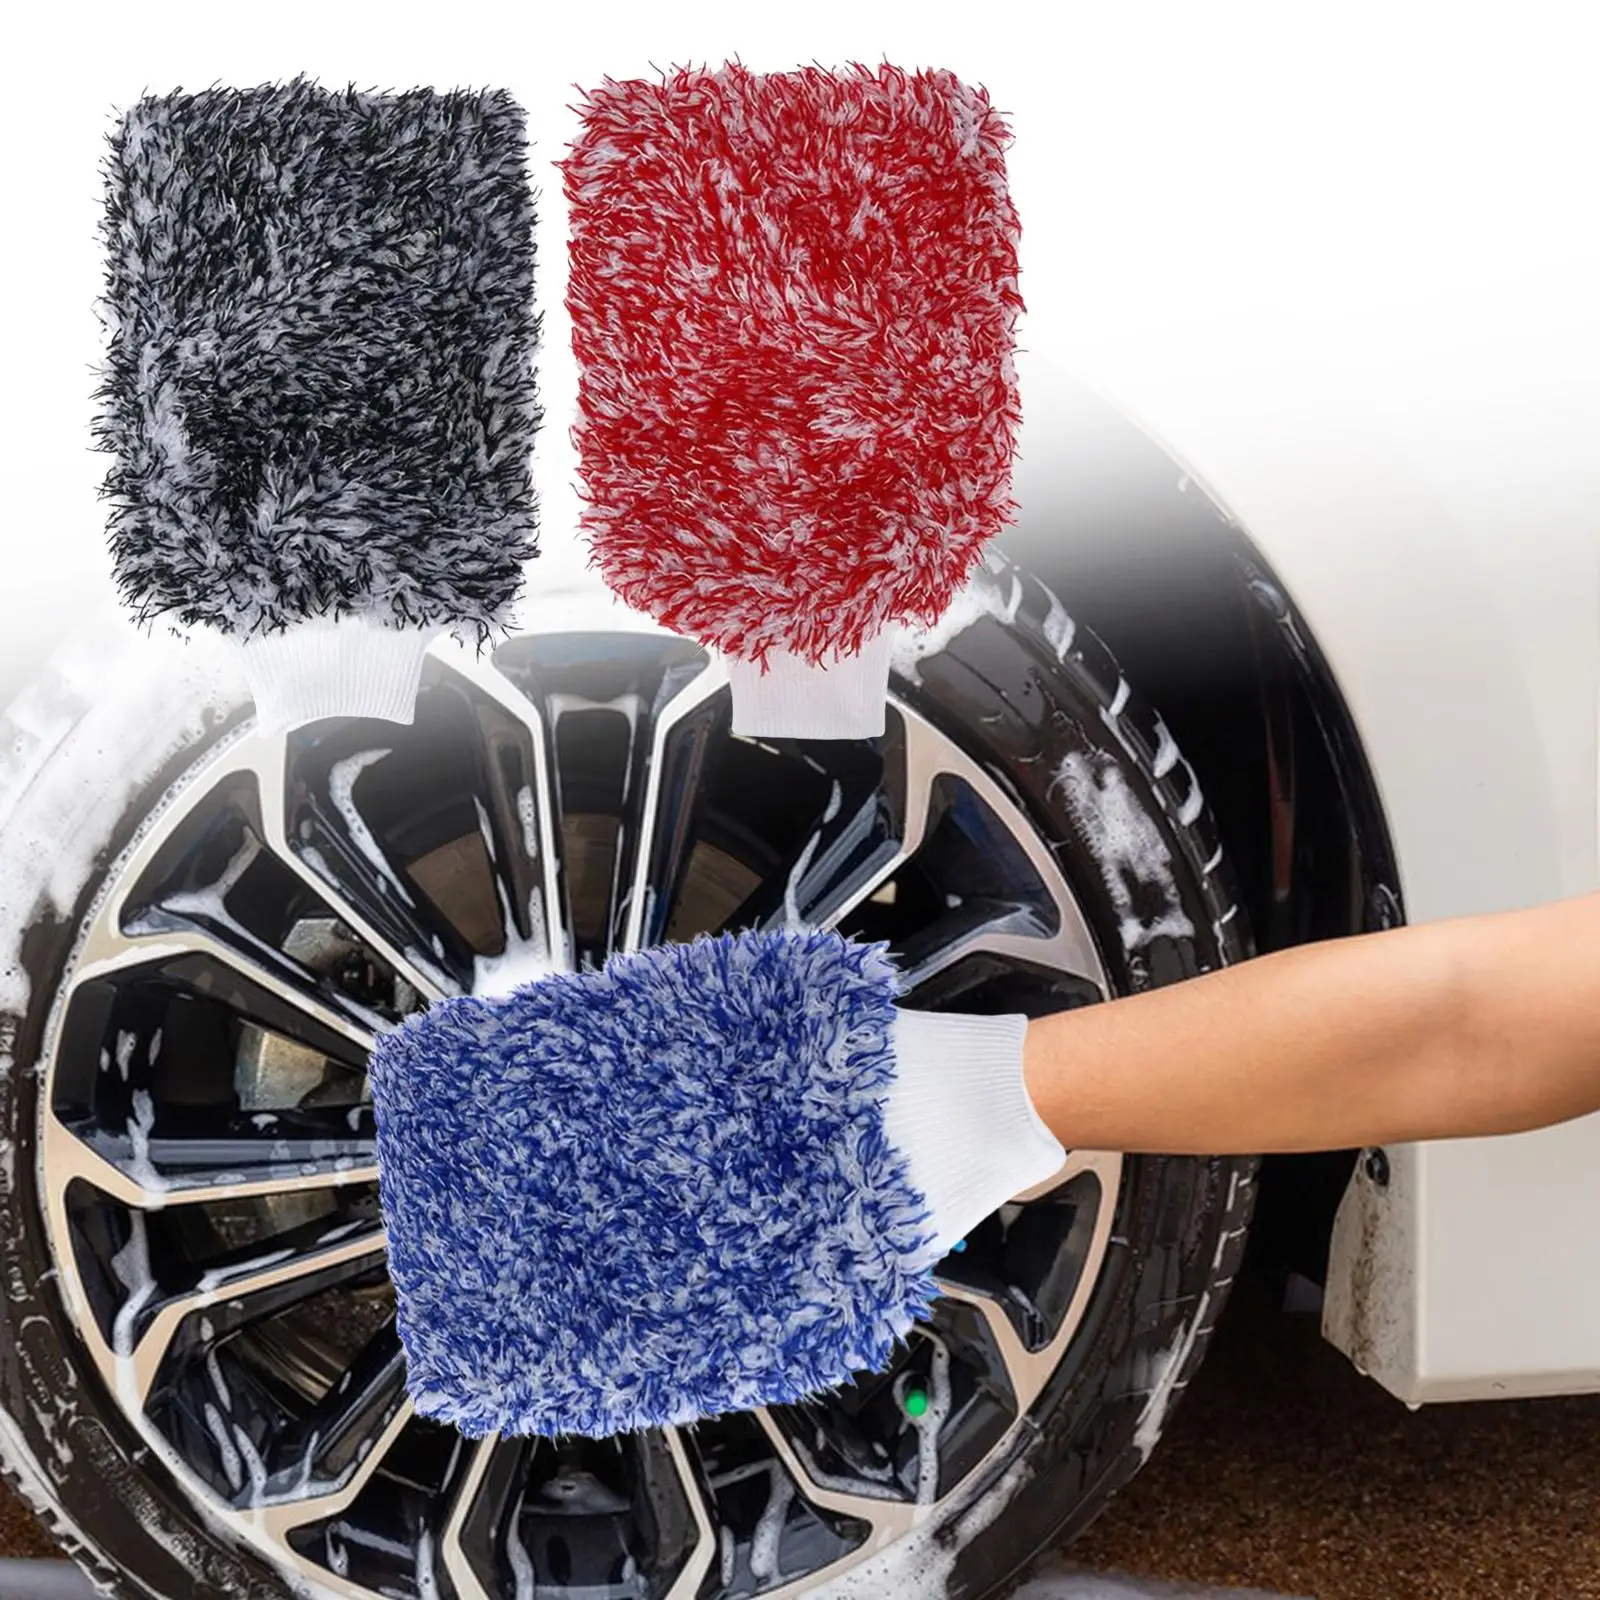 Car Wash Mitt Absorbent Holds Tons of Sudsy Water Effective Washing Microfiber Lint Free Washing Glove for Automotives Cars